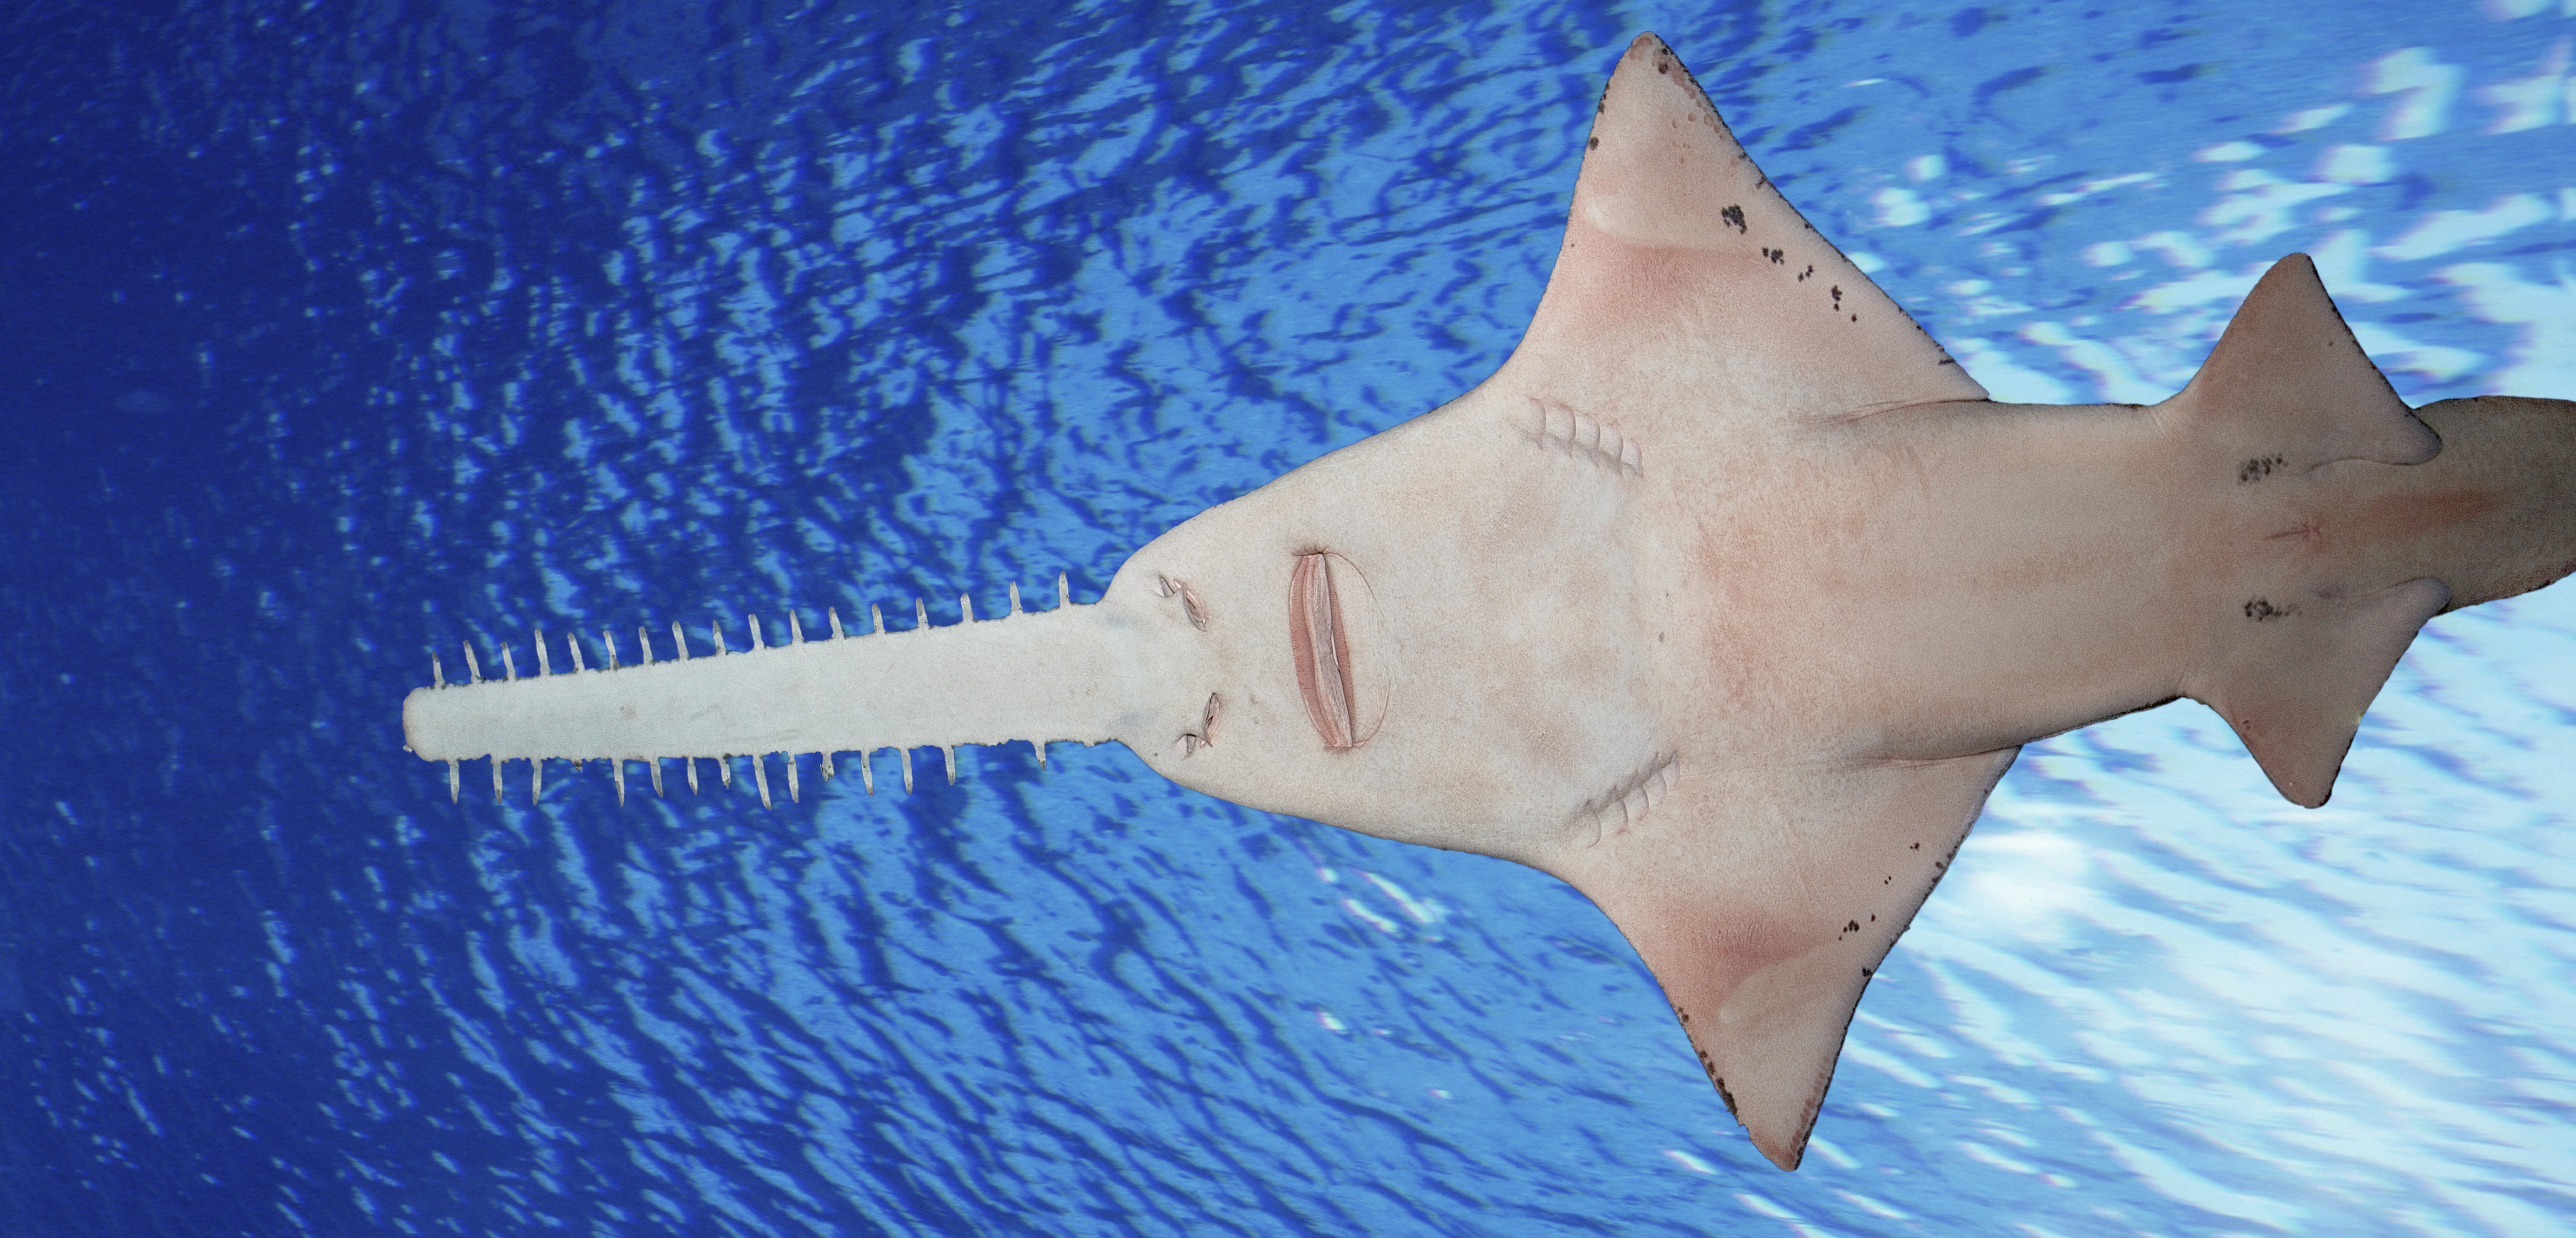 Sawfish are a type of ray, and are related to sharks. Photo by Jim Zuckerman/Corbis